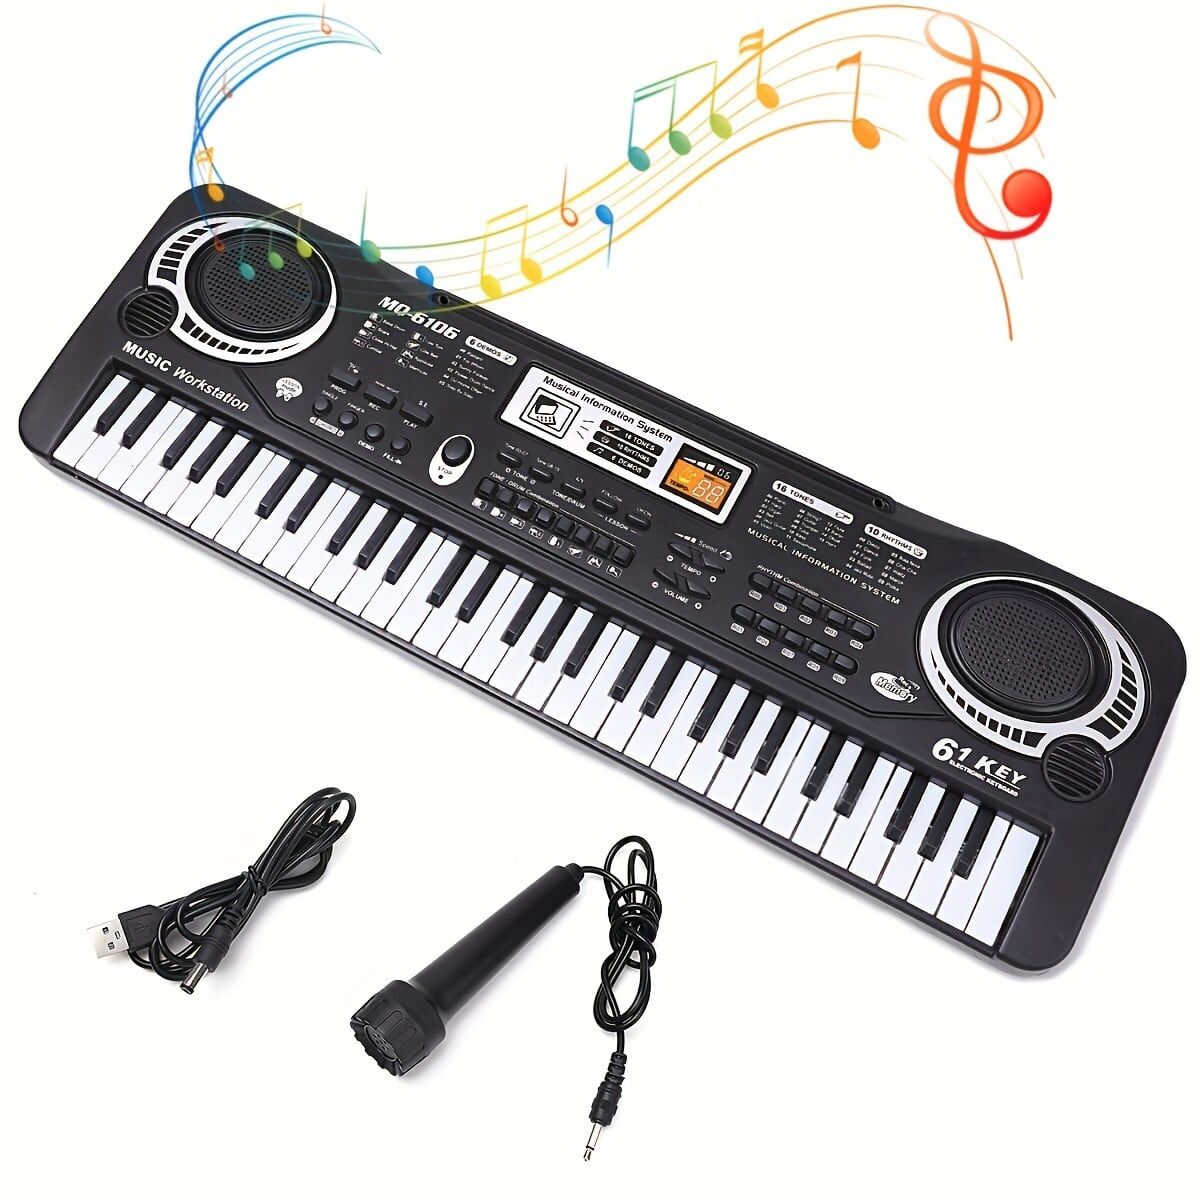 SHEIN 61 Key Digital Music Piano Keyboard for Kids,Portable Electronic Musical Instrument,Multi-function Keyboard with Microphone Gifts for Boys and Girls (Black) Black one-size